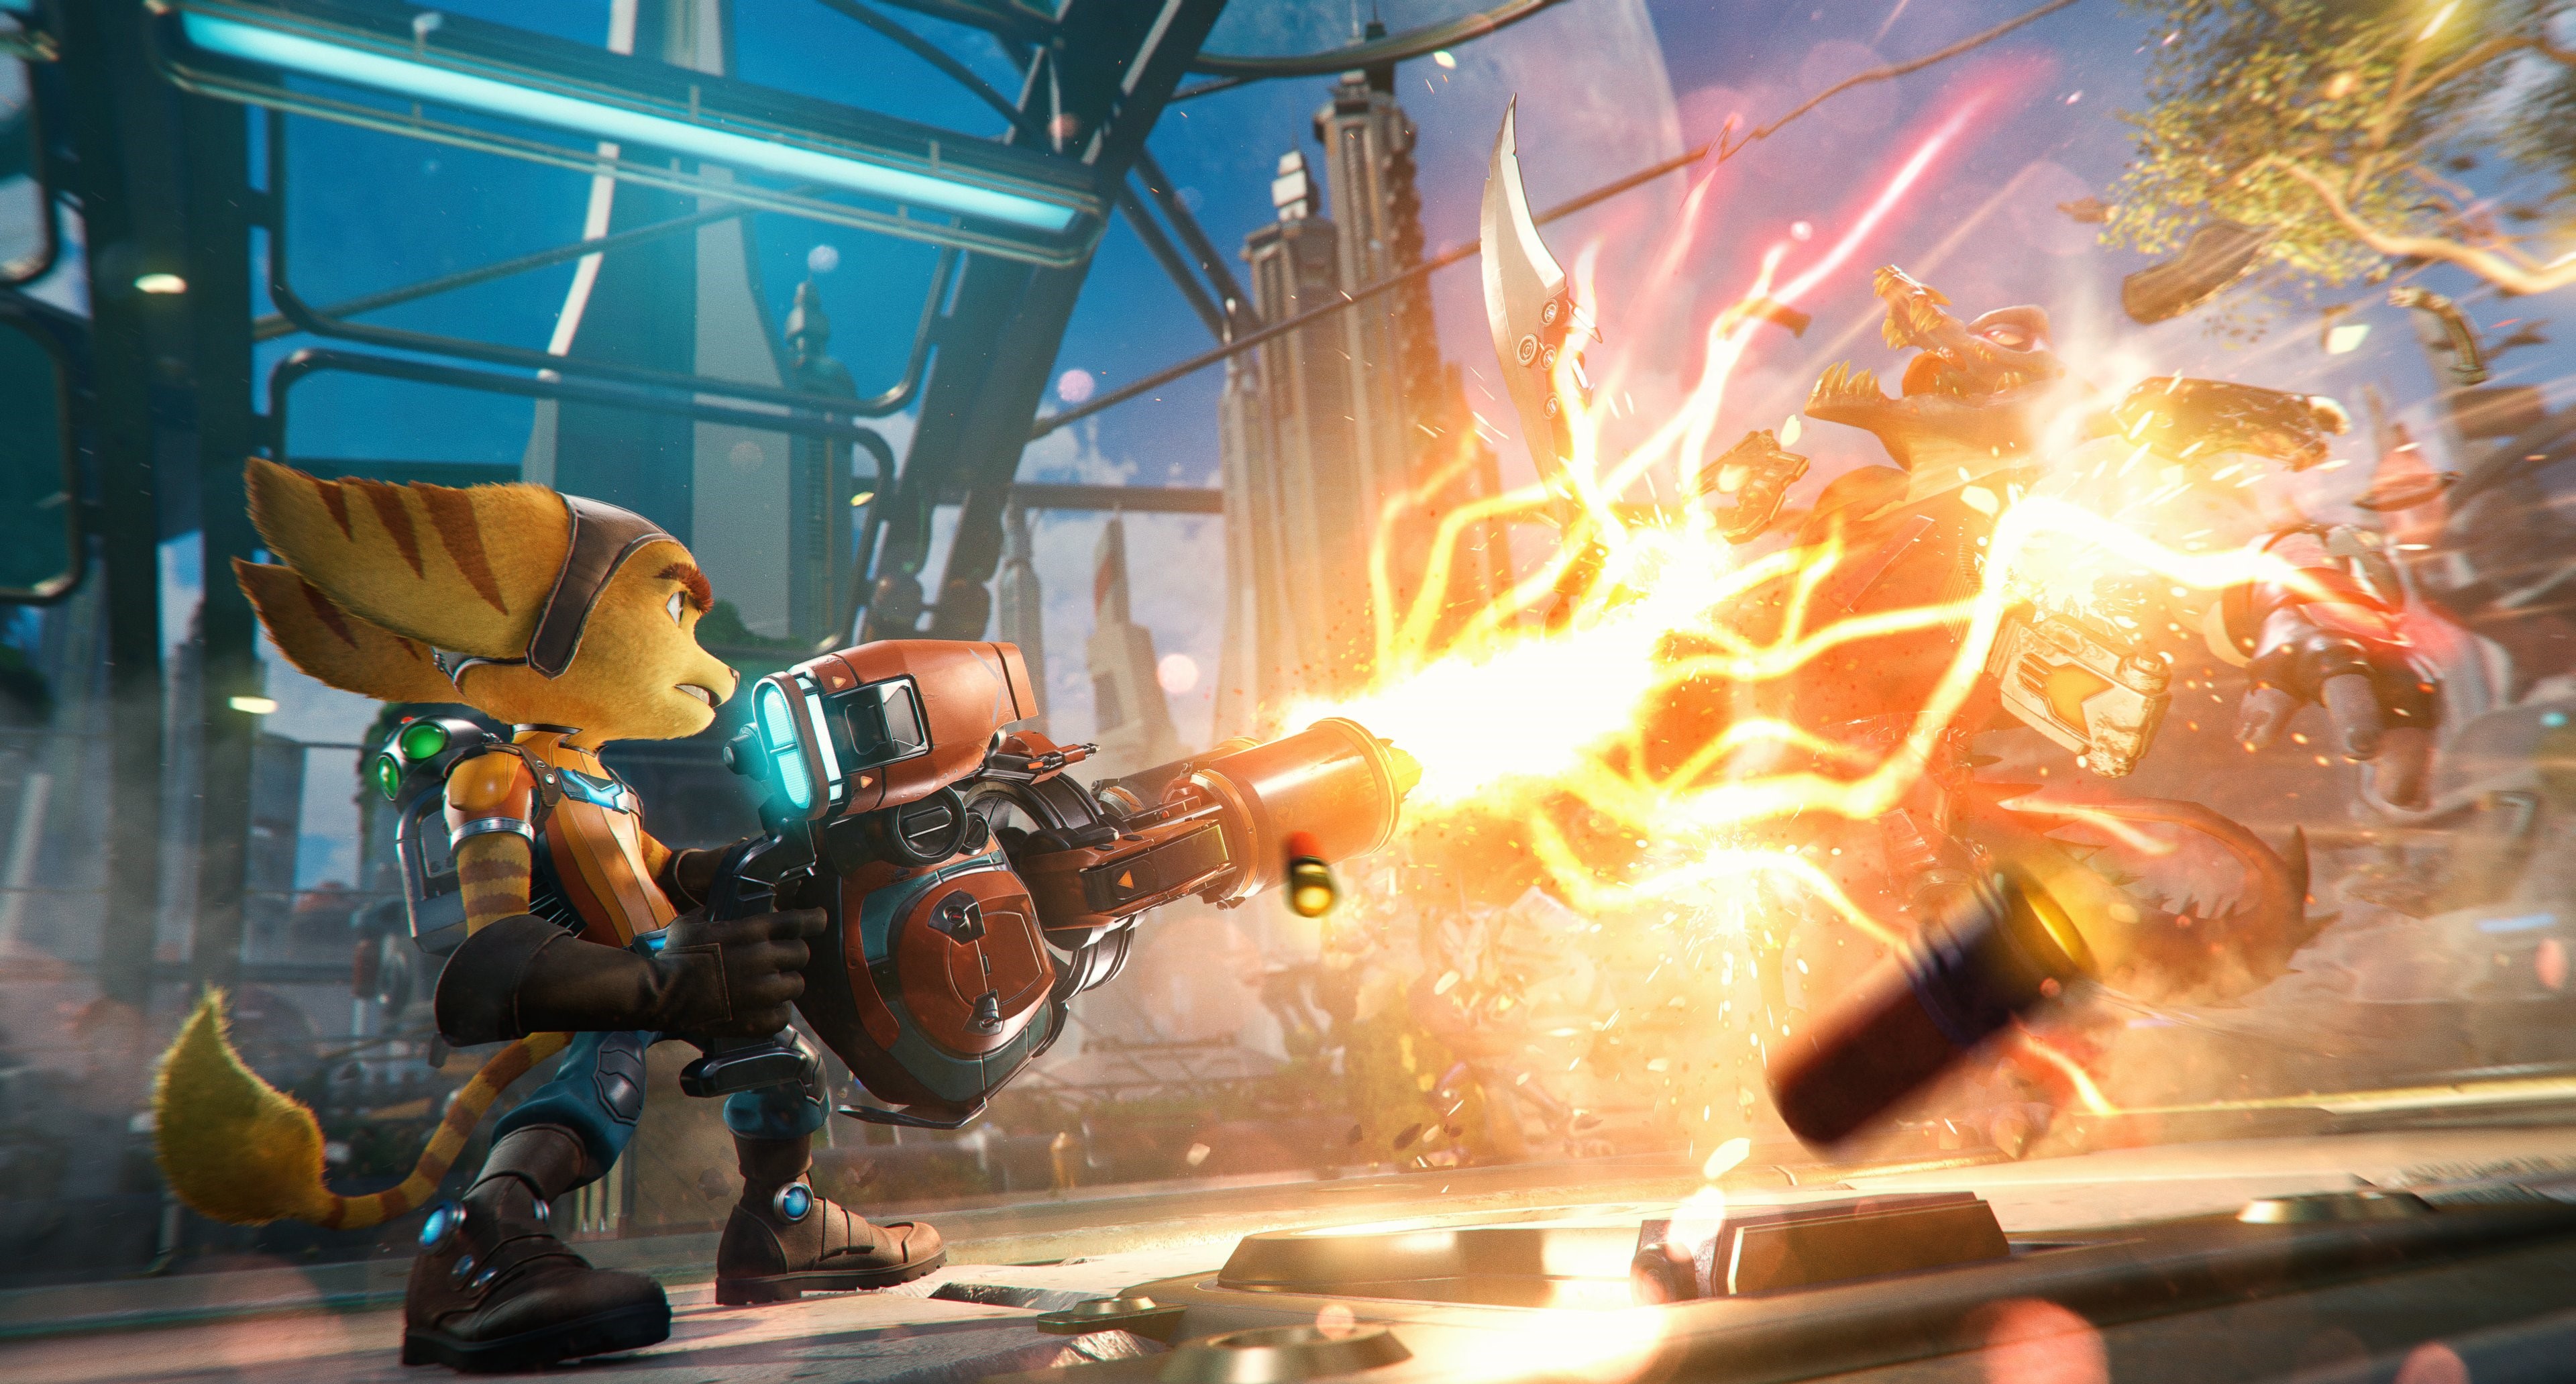 Is Ratchet and Clank: Rift Apart the Best Looking PS5 Game Yet? | Den of Geek